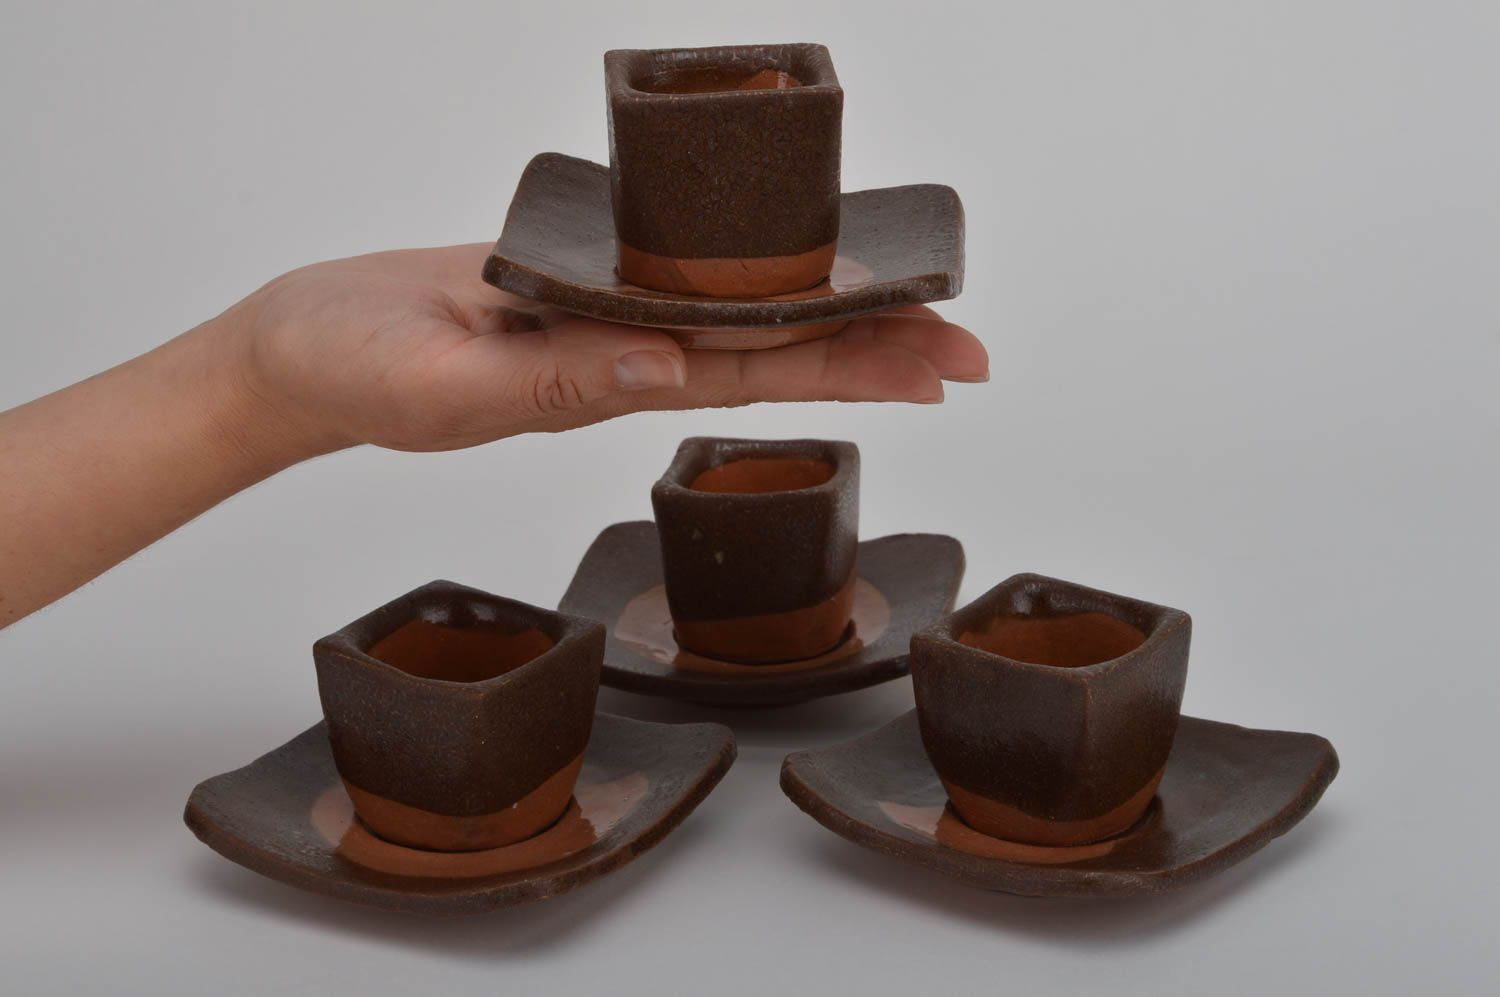 Set of 4 four clay coffee cups for espresso with saucers 2,16 lb photo 3